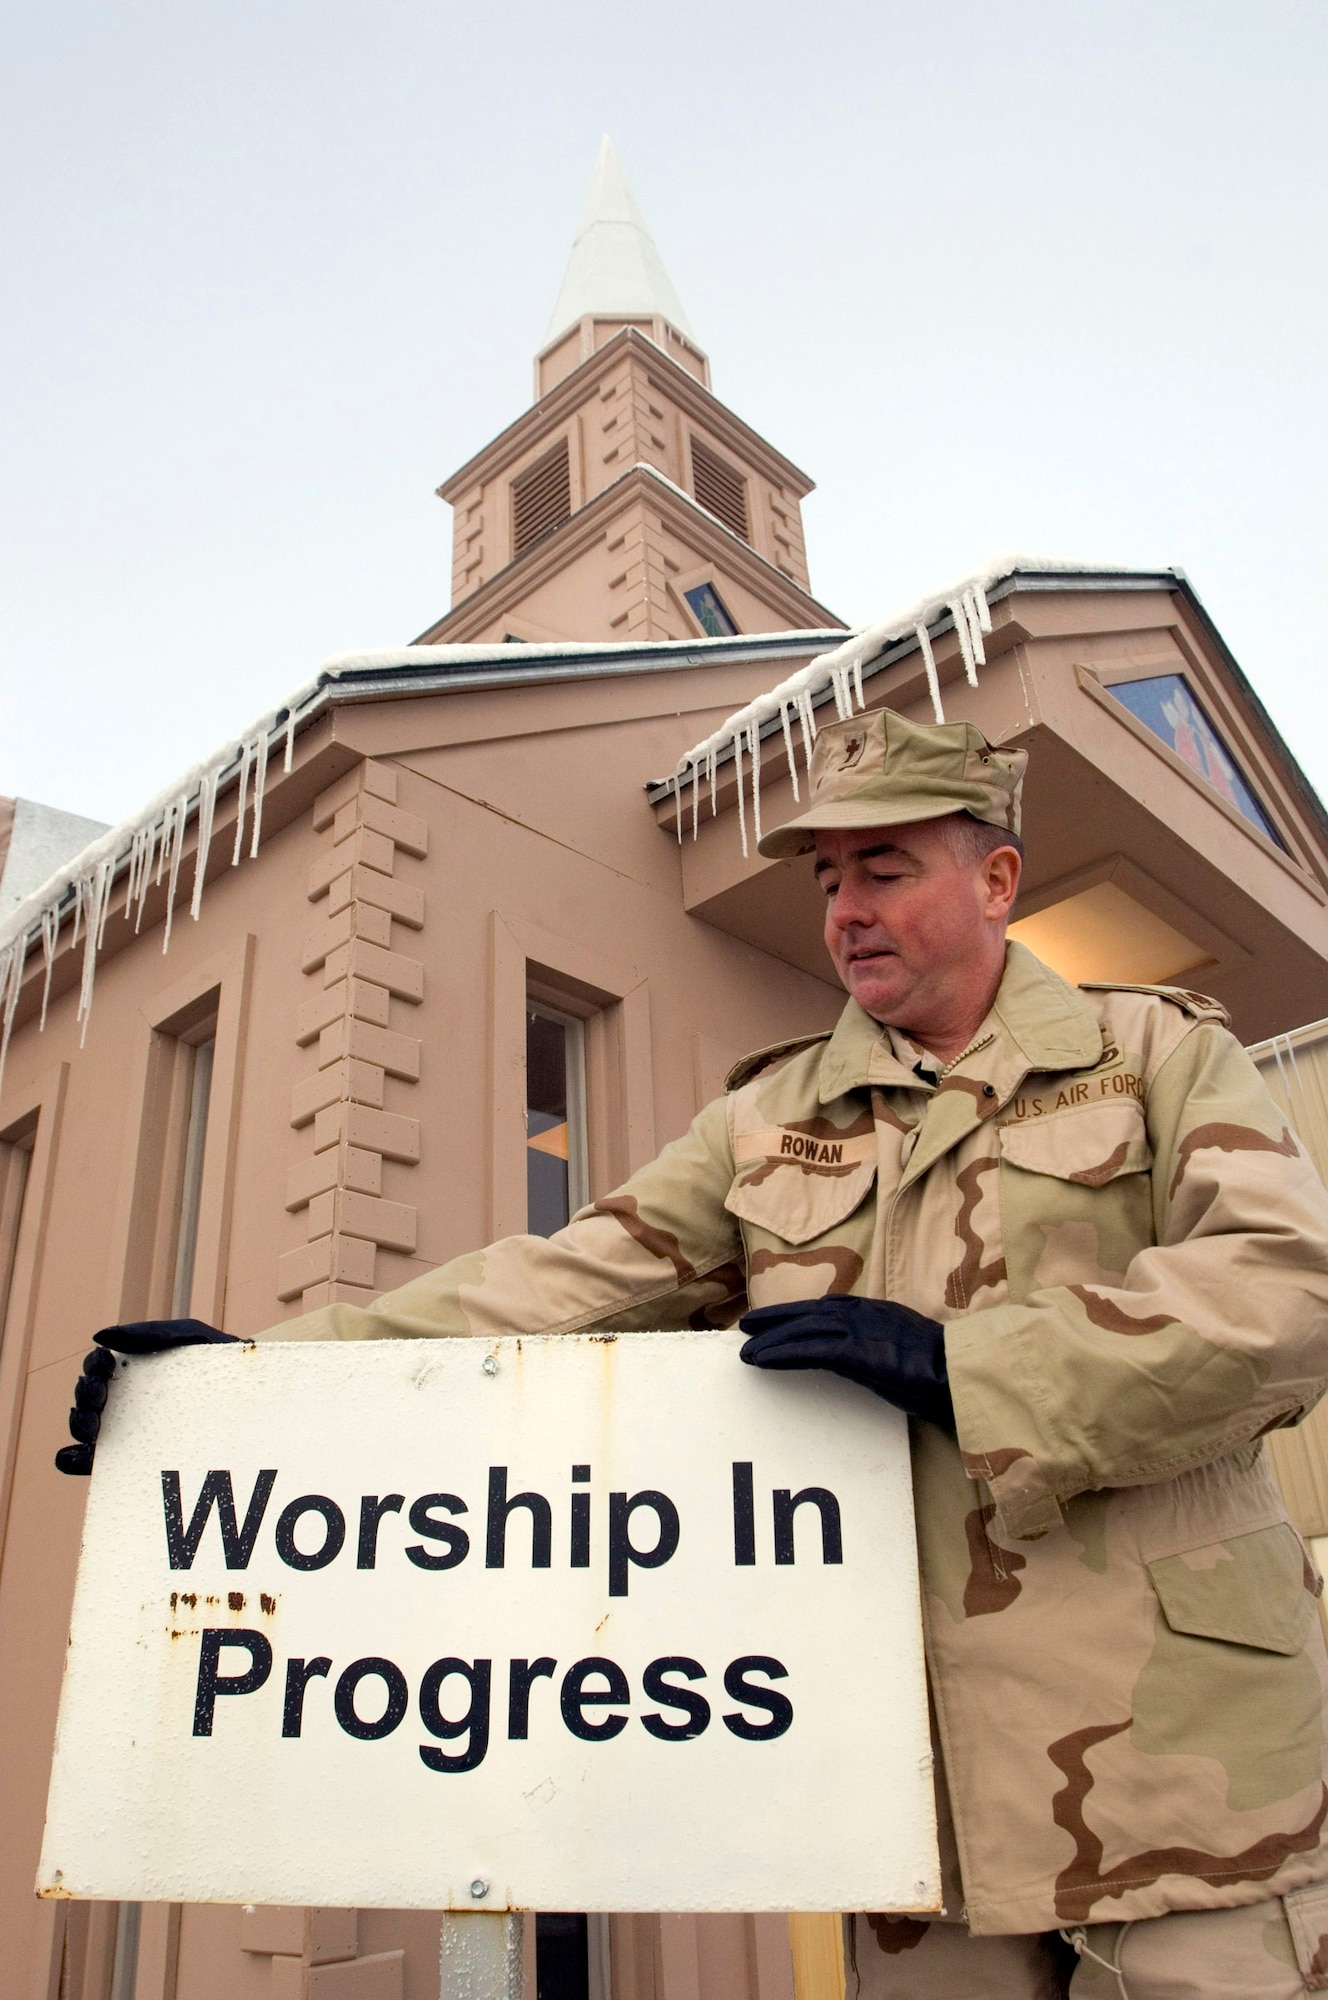 MANAS AIR BASE, Kyrgyzstan (AFPN) -- Chaplain (Maj.) Mark Rowan places the "Worship in Progress" sign outside the chapel here. Volunteers have renovated the chapel and built a steeple. It is the tallest in the region. Major Rowan is the Catholic chaplain for the 376th Air Expeditionary Wing. (U.S. Air Force photo by Master Sgt. John E. Lasky)